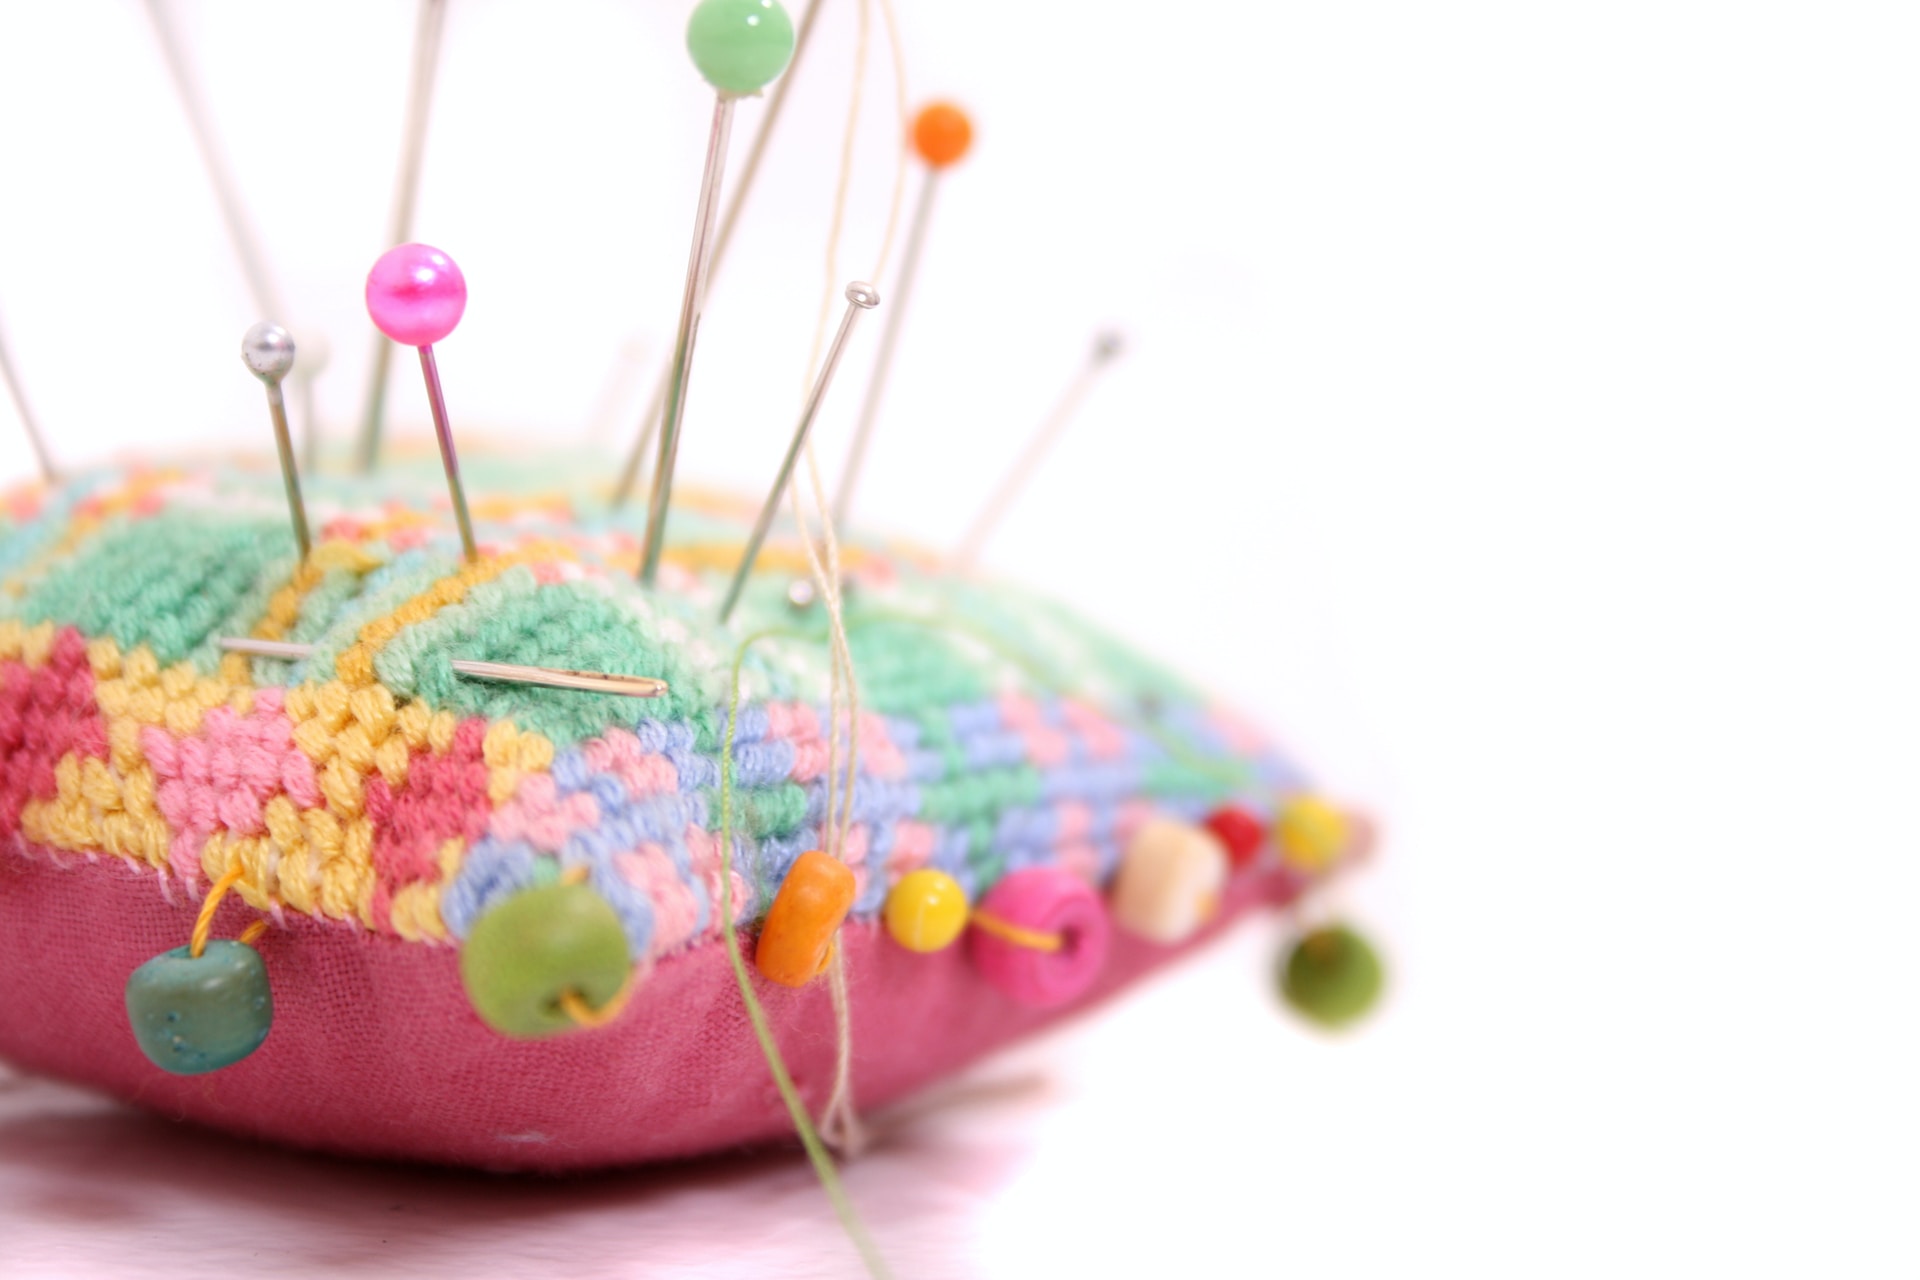 Numerous pins pushed into a colourful pin cushion